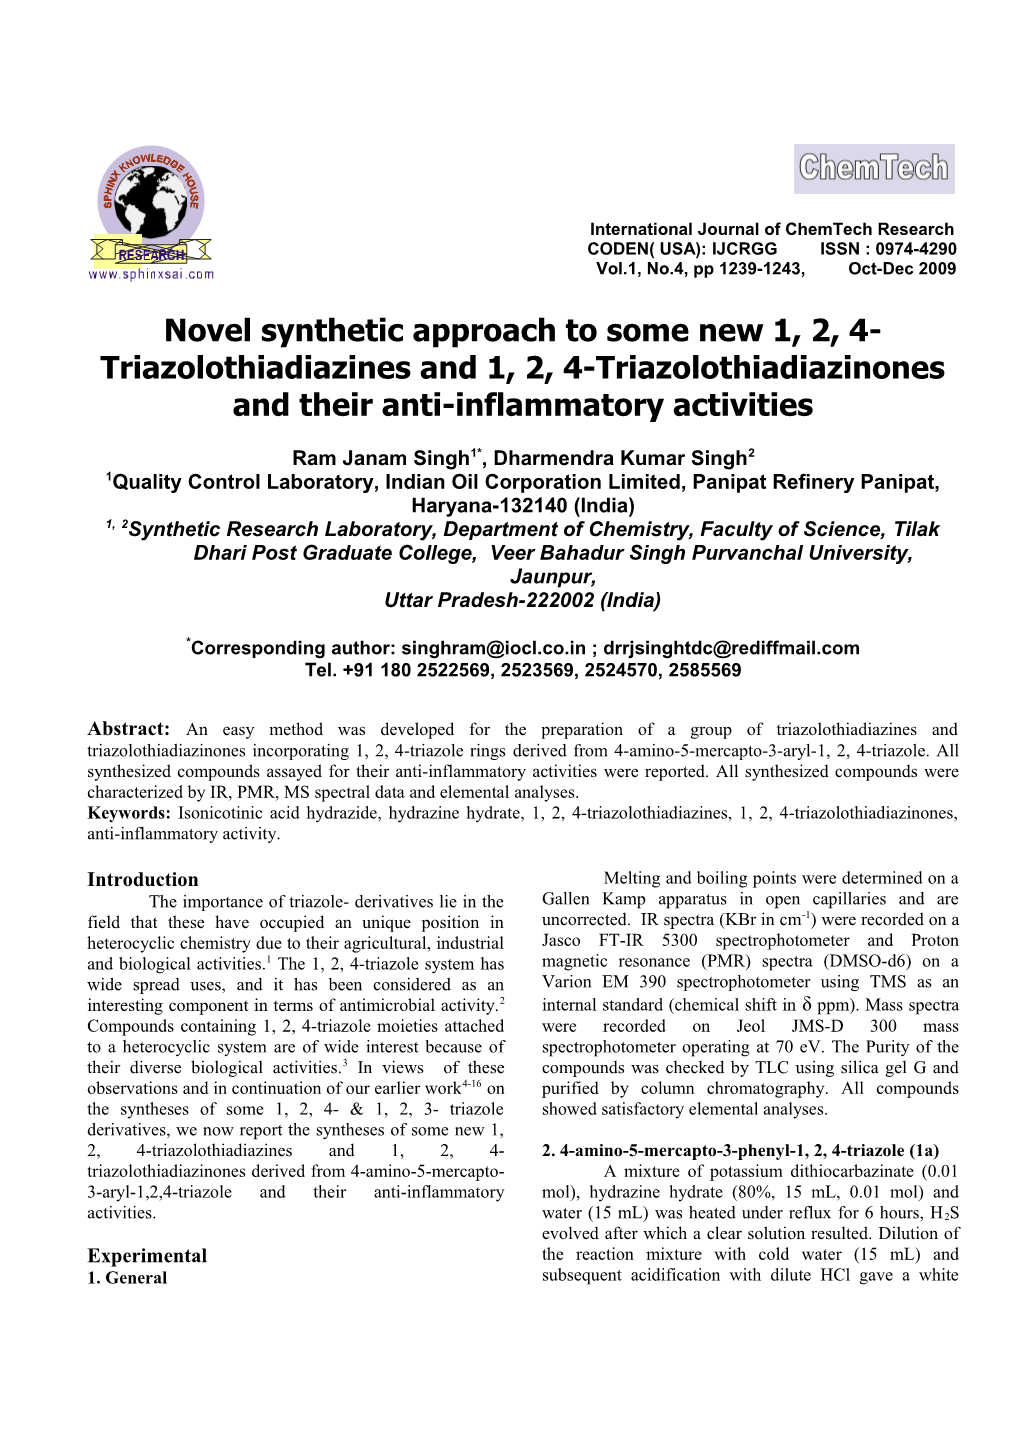 Novel Synthetic Approach to Some New 1, 2, 4-Triazolothiadiazines and 1, 2